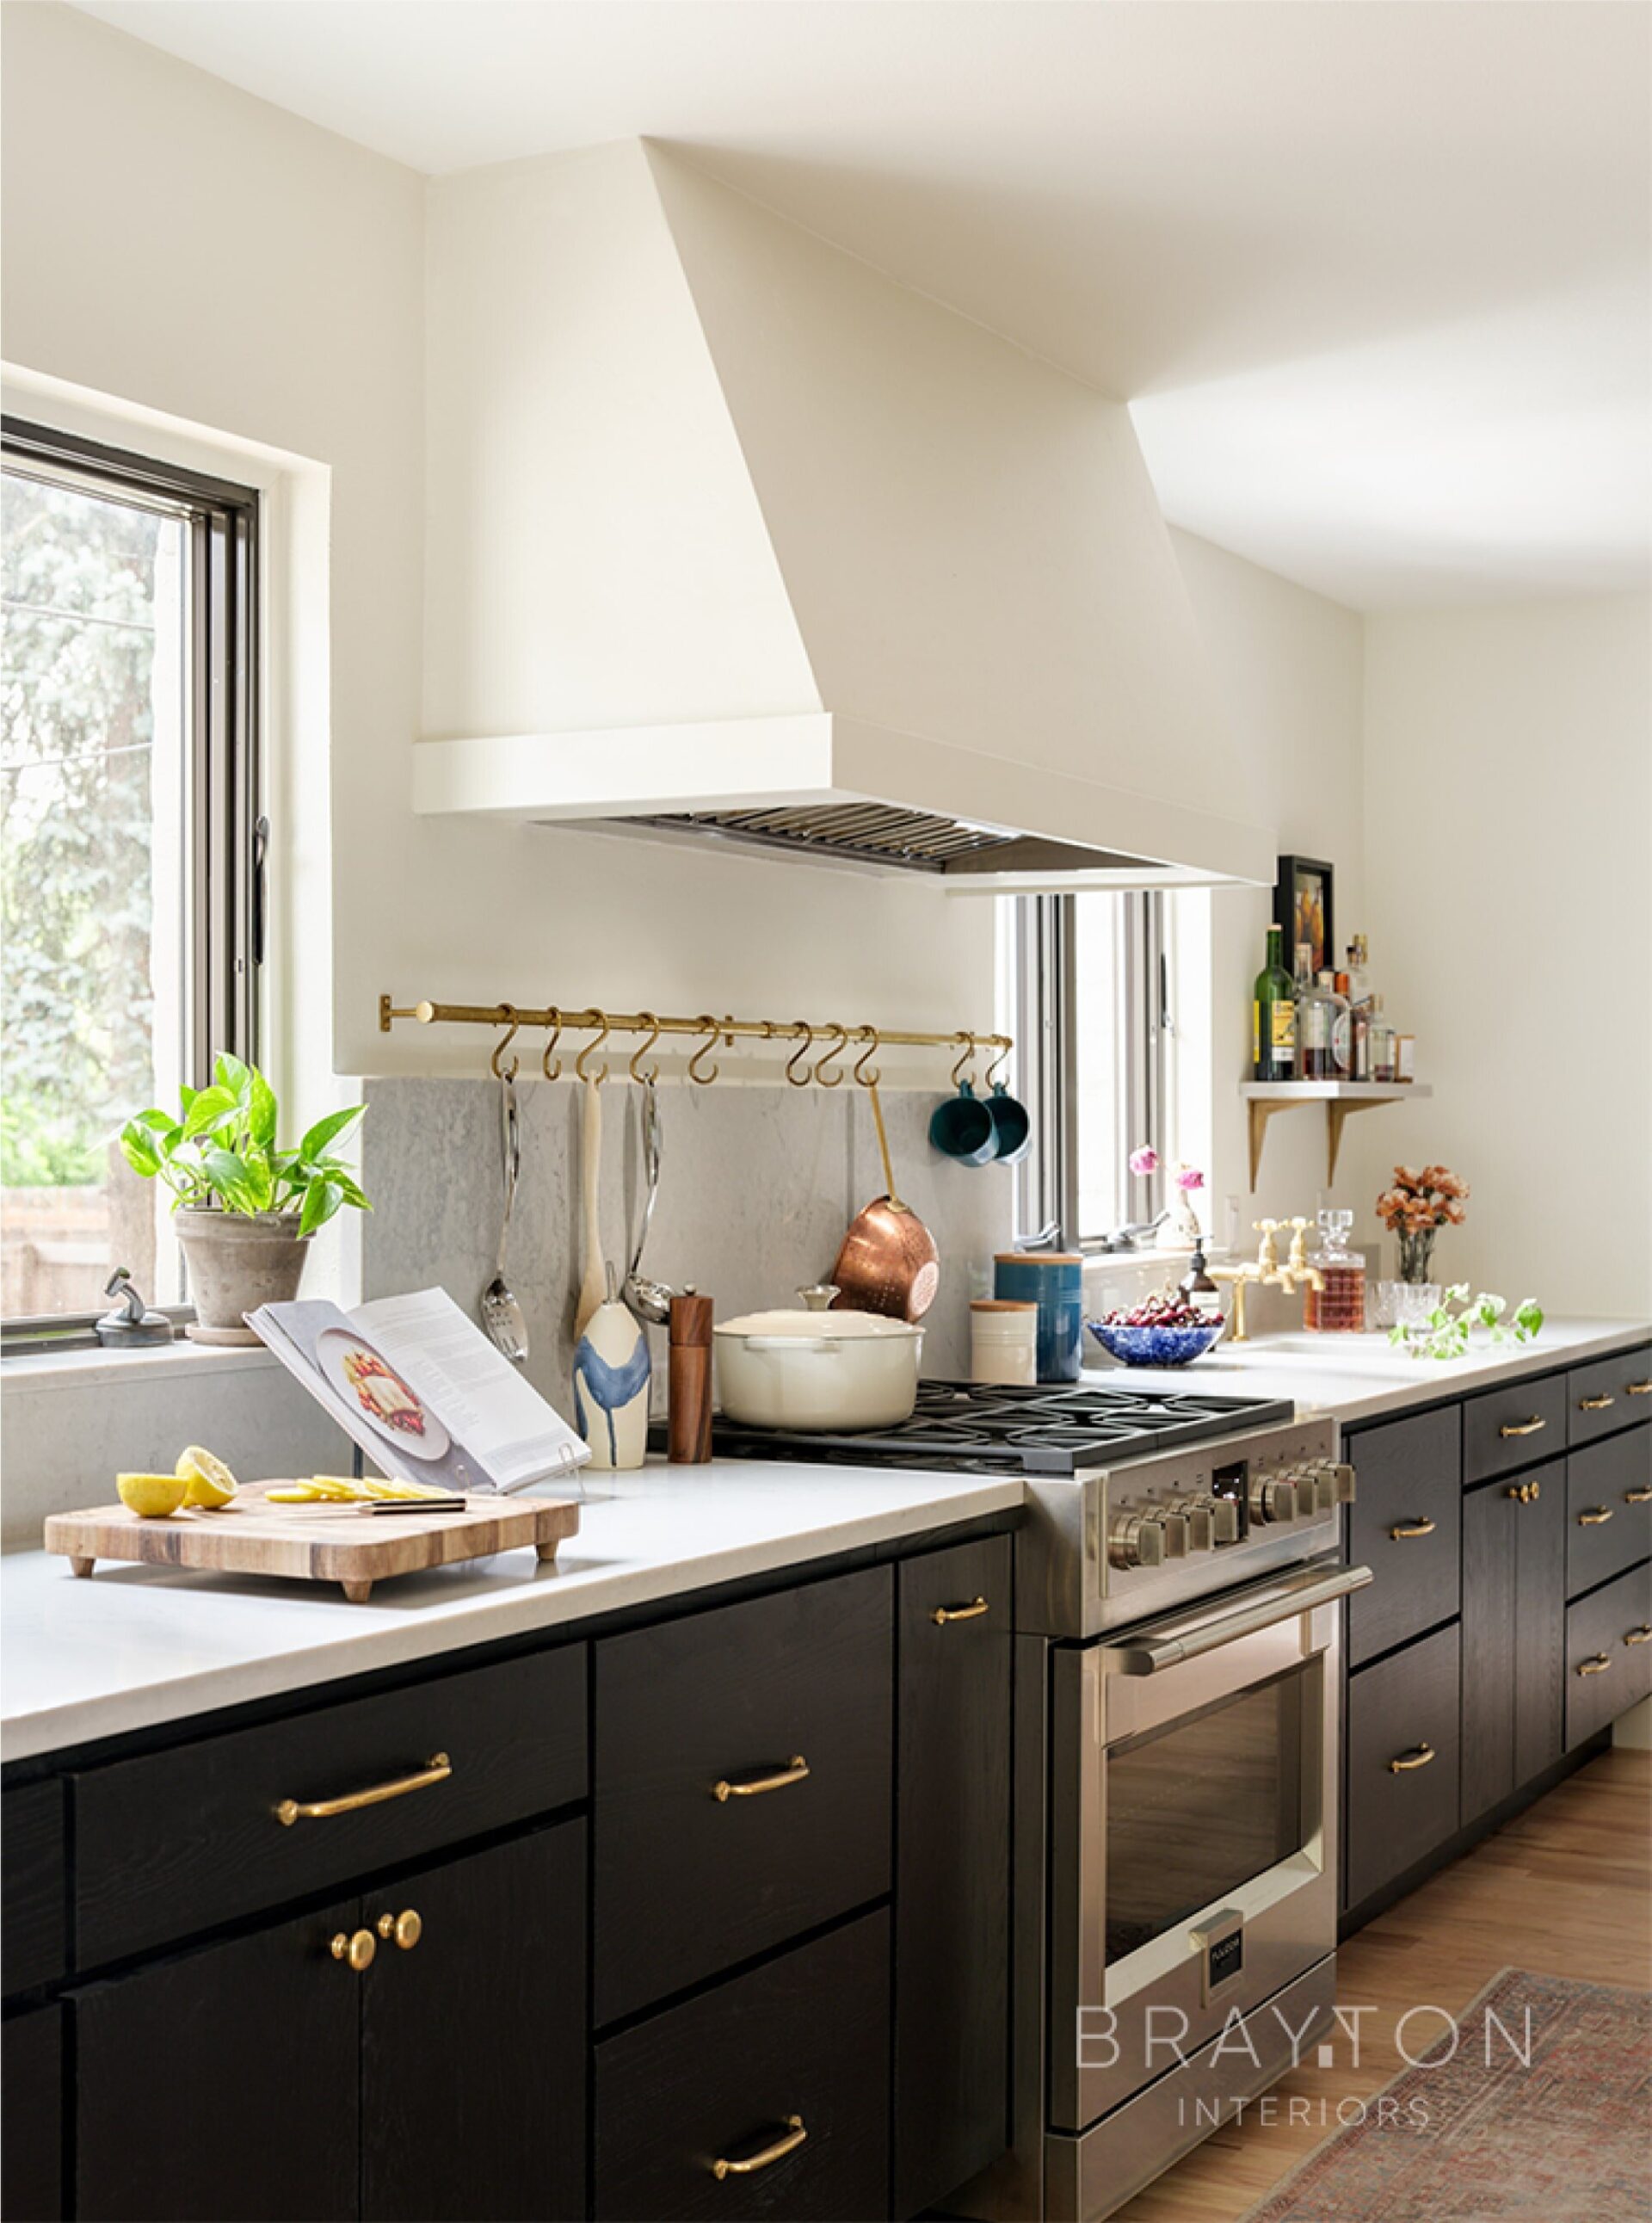 The feature kitchen wall has a custom drywall range hood, an antique brass utensil rod, and a bar sink with an antique brass faucet.